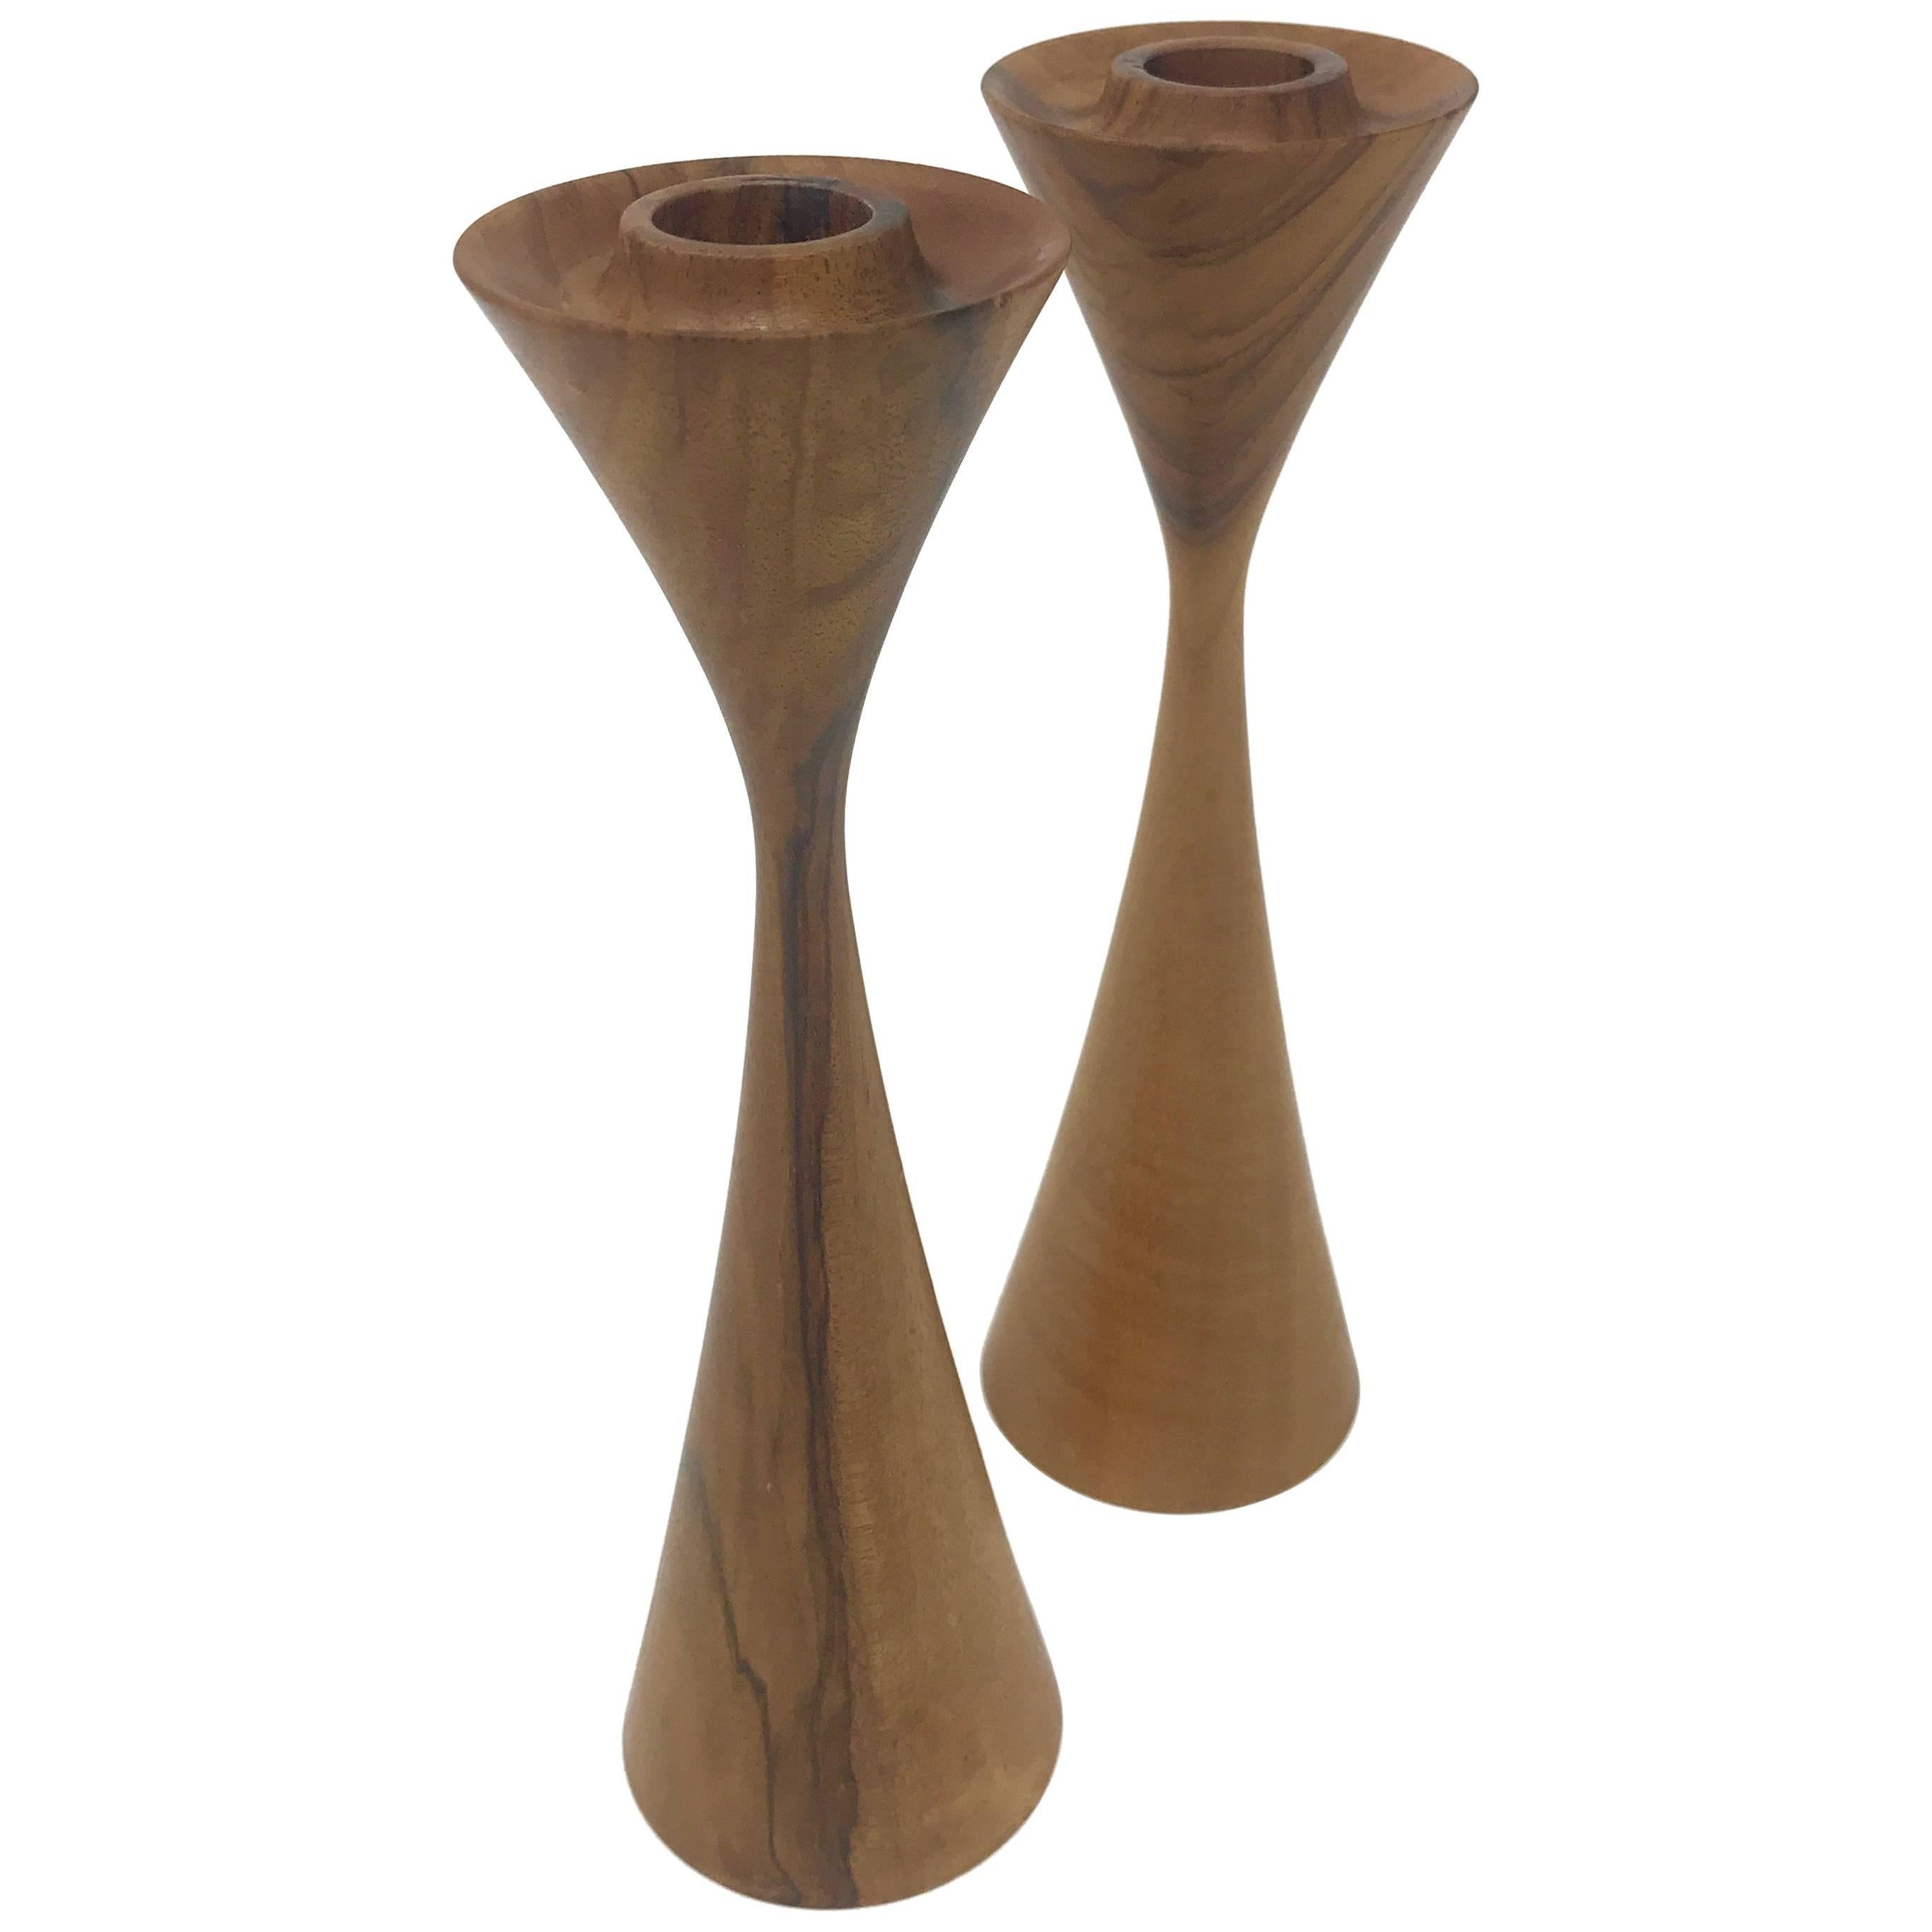 Pair of Turned Wooden Candlesticks by Lanny Lyell